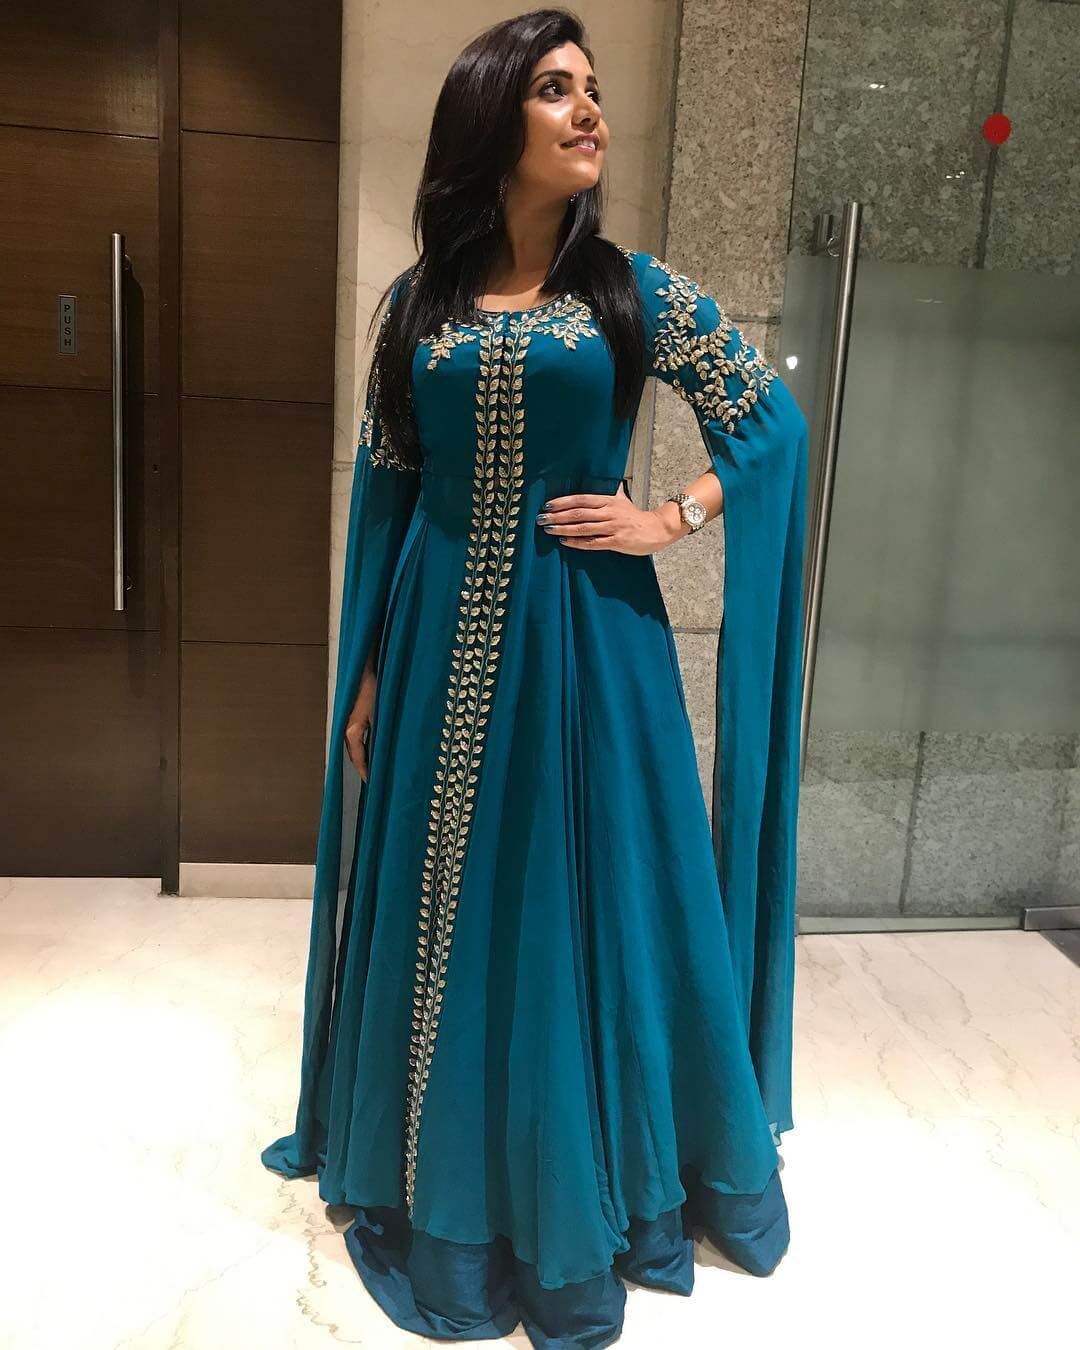 Mukta Barve Look Stunning In Blue Gown With Long Slit Cut Sleeves